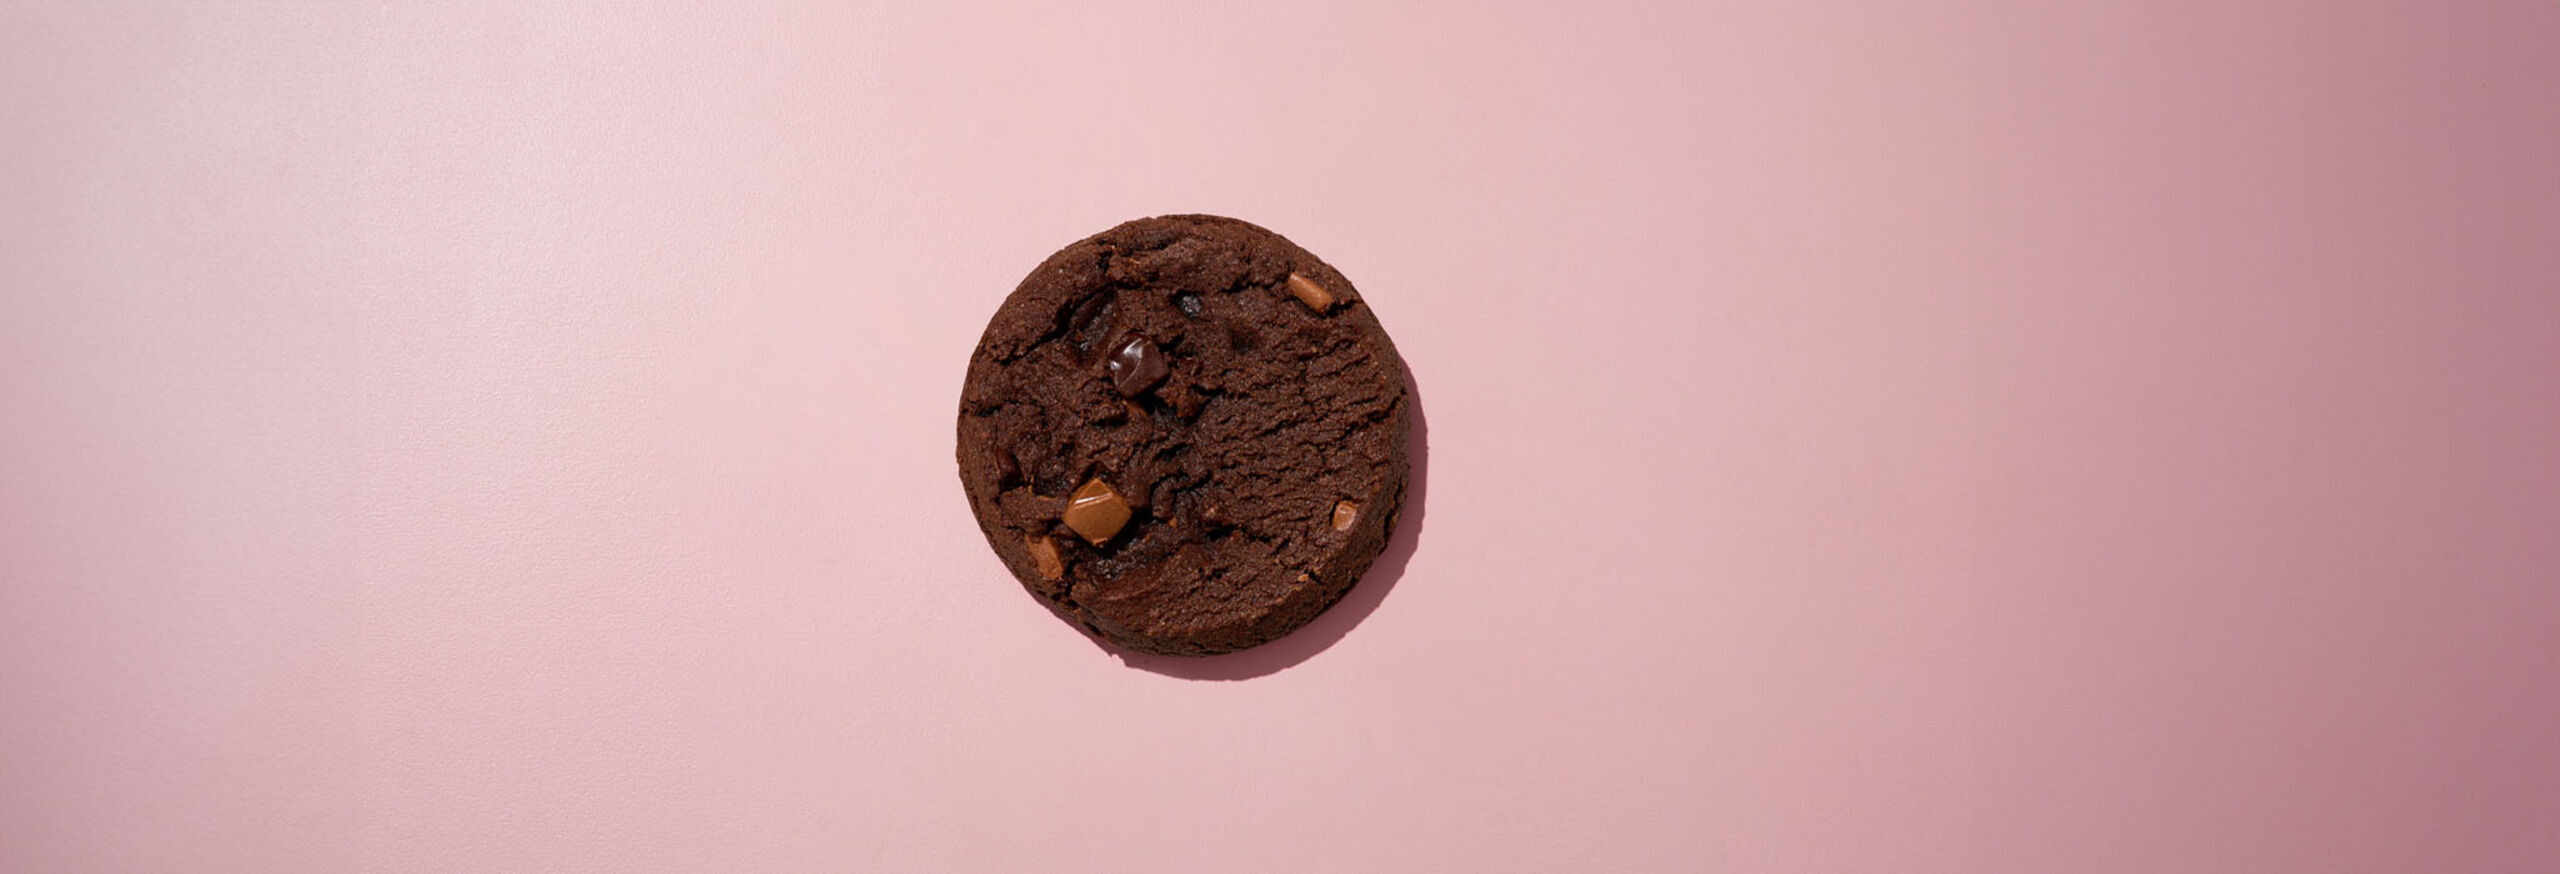 21040000_Moodfoto_Cookie Duo Chocolade